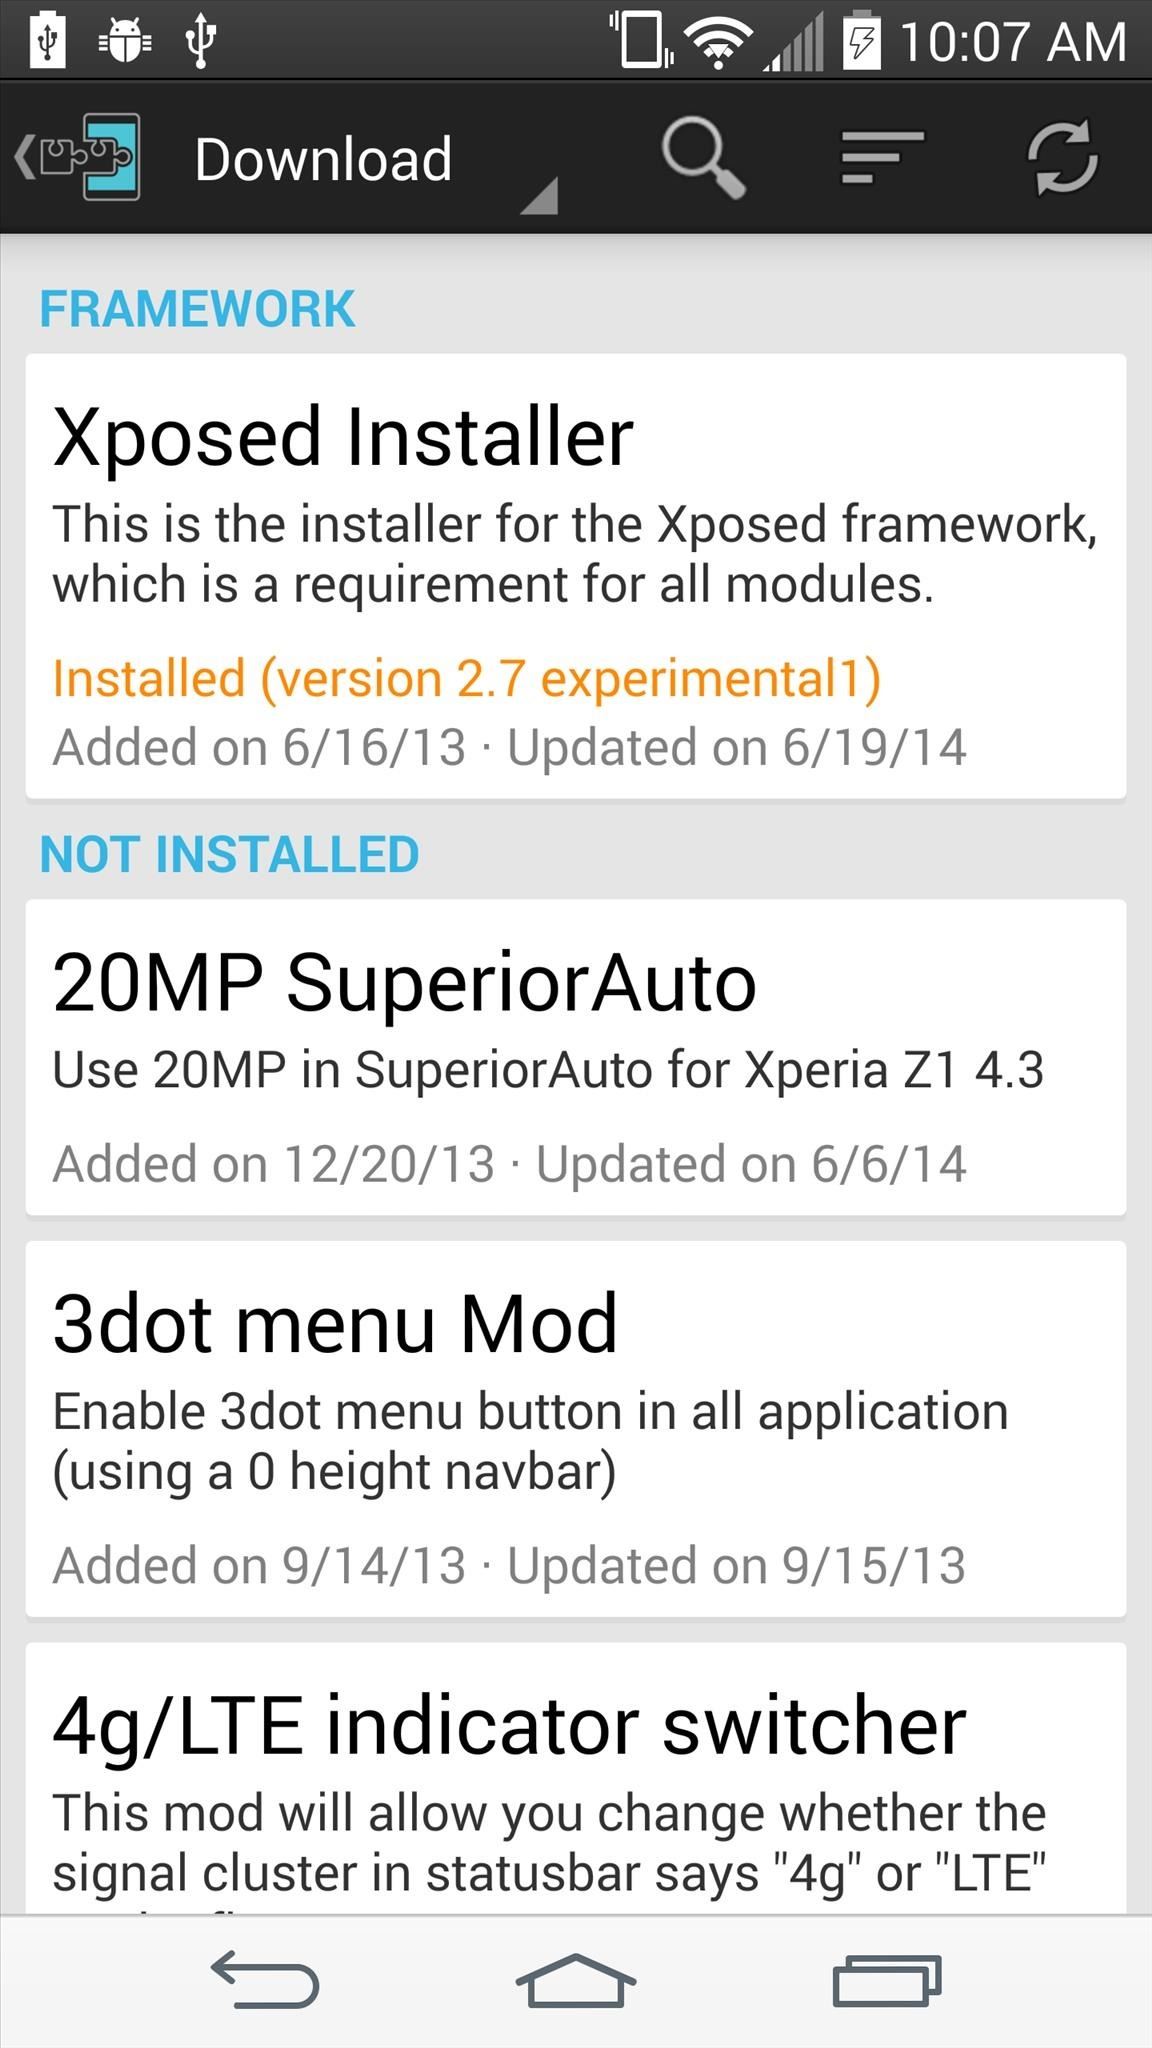 Install the Xposed Framework on Your Rooted LG G3 for 100s of Fast & Easy Mods